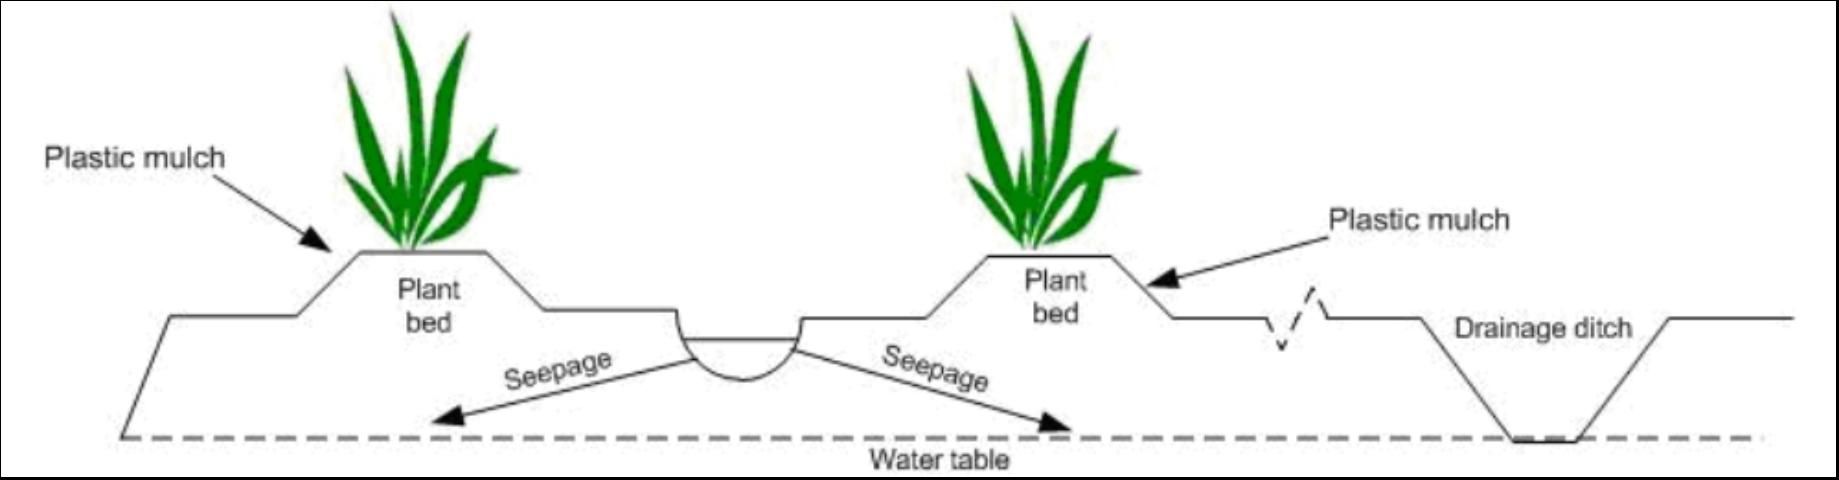 Figure 1. Layout of the beds and the seepage irrigation system at the Ft. Pierce site.